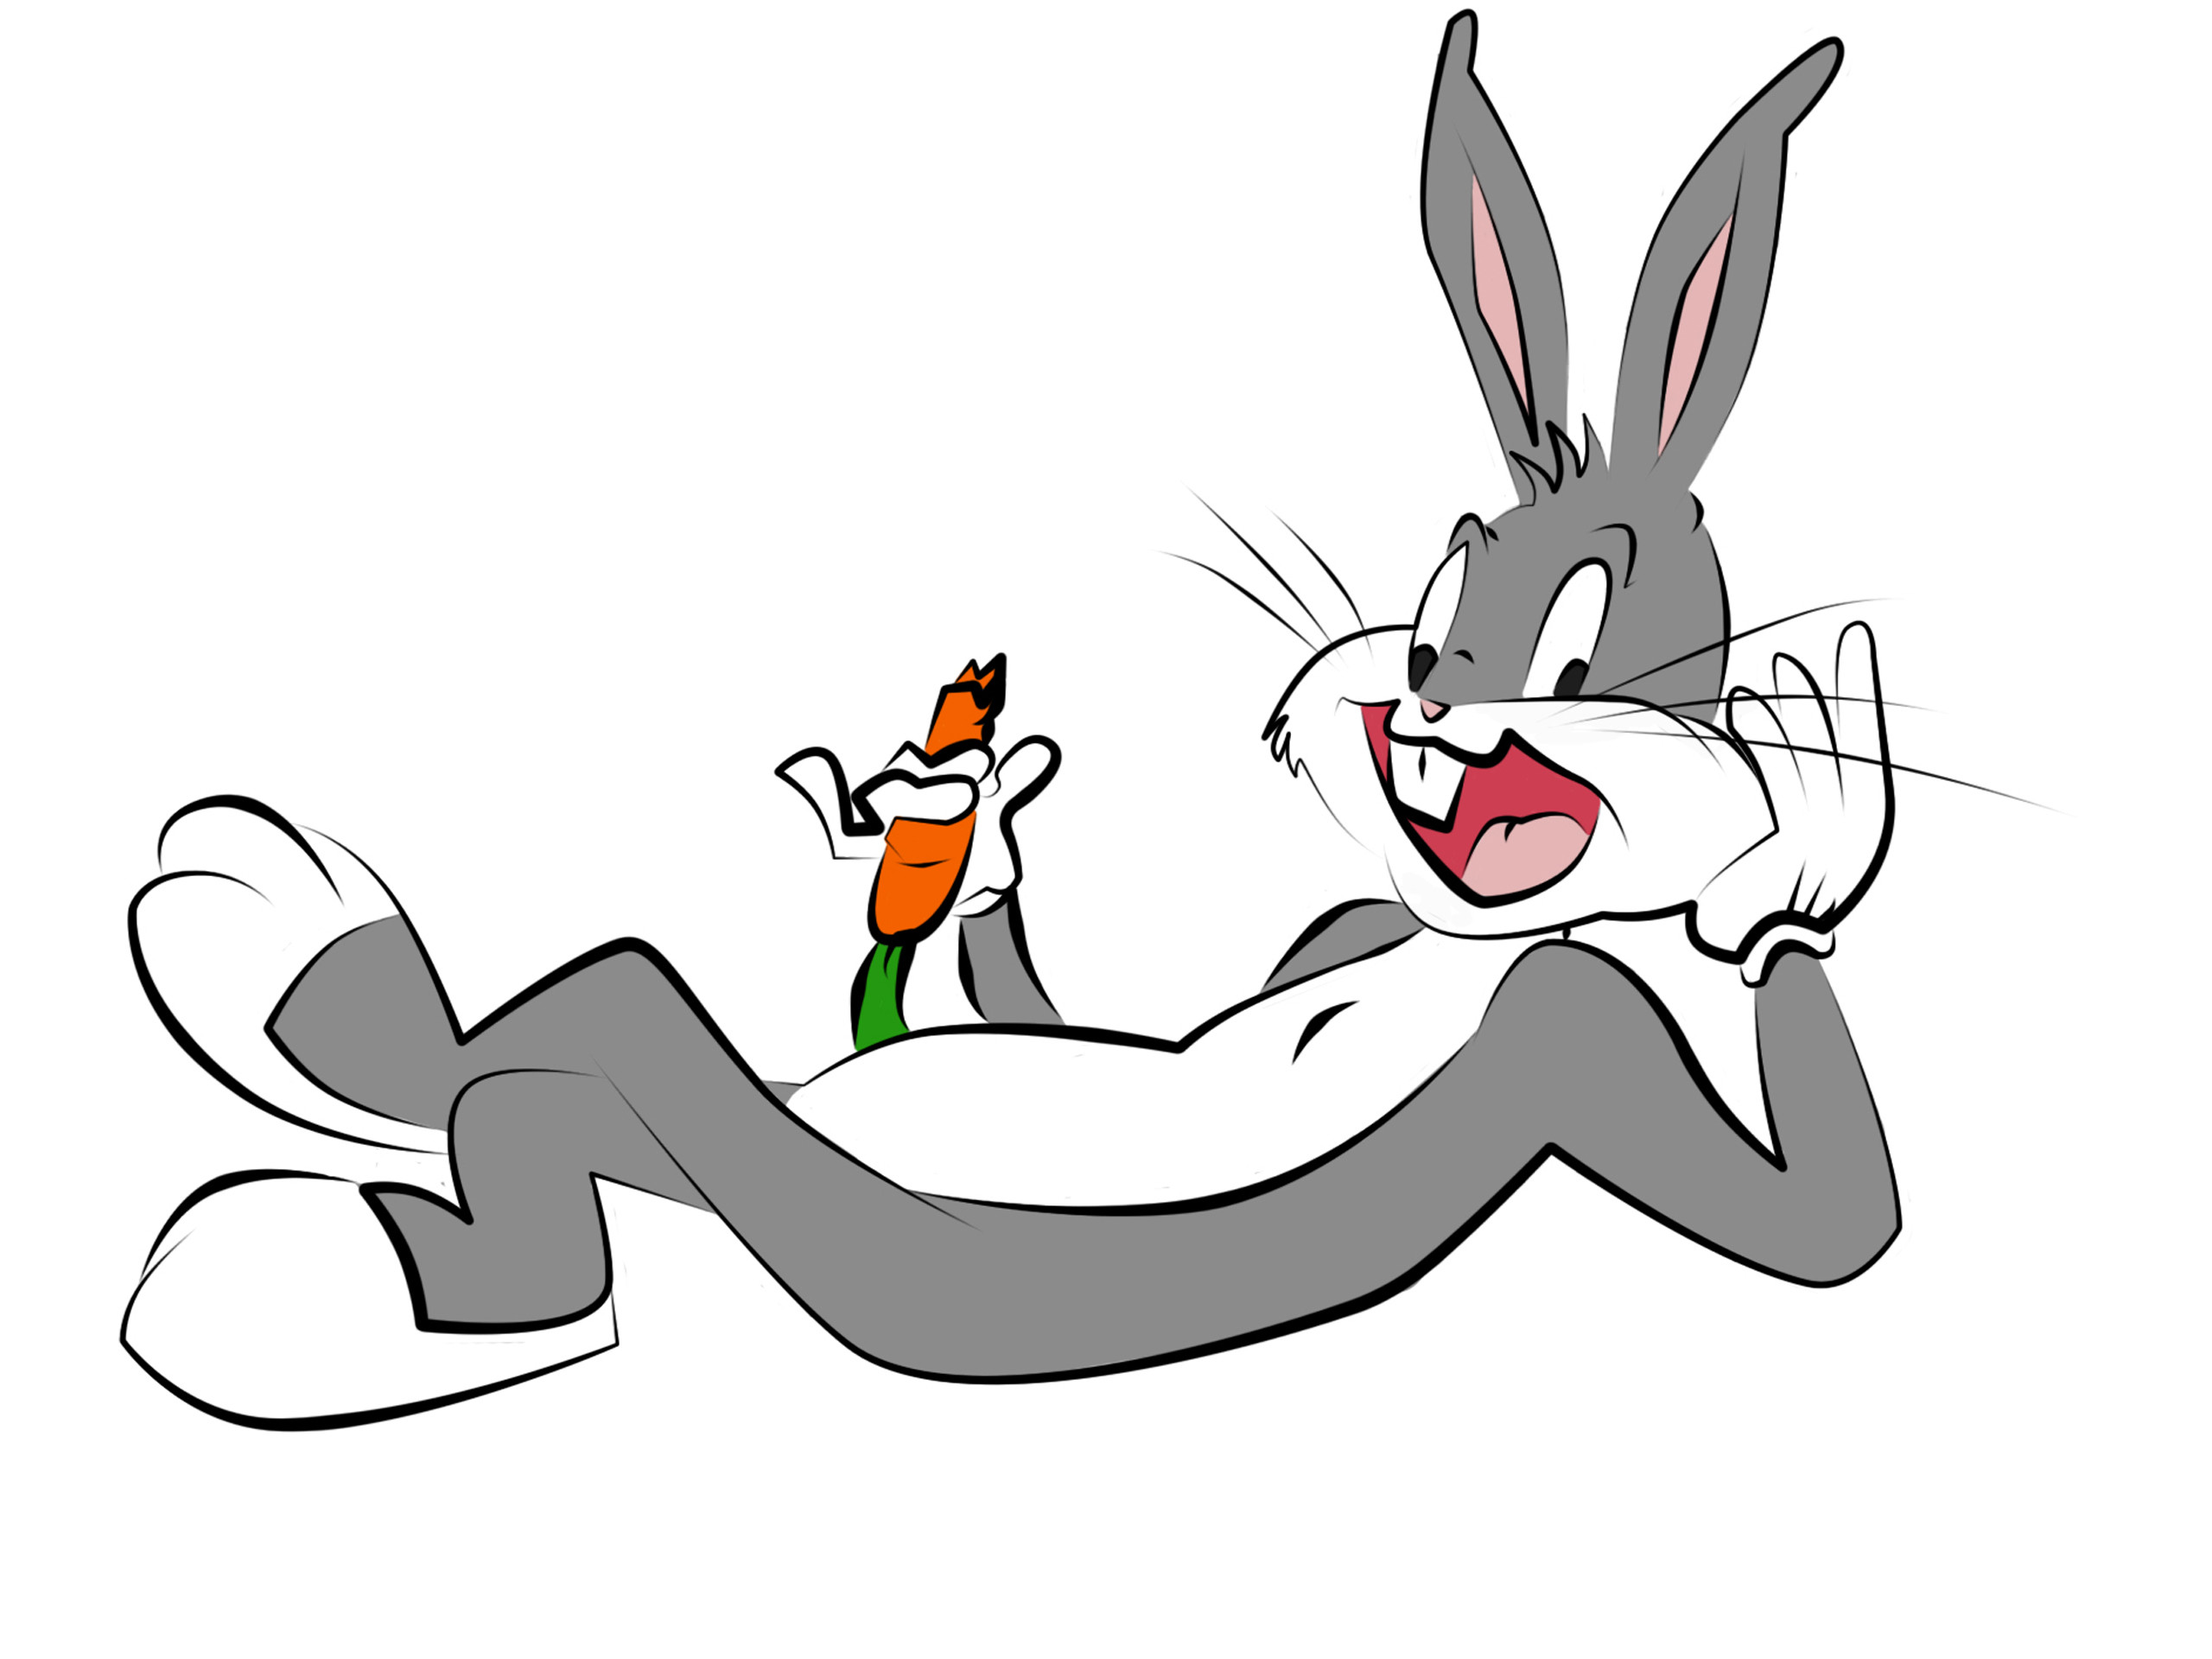 Bugs Bunny HD Space Jam 2 Wallpapers  HD Wallpapers  ID 74001